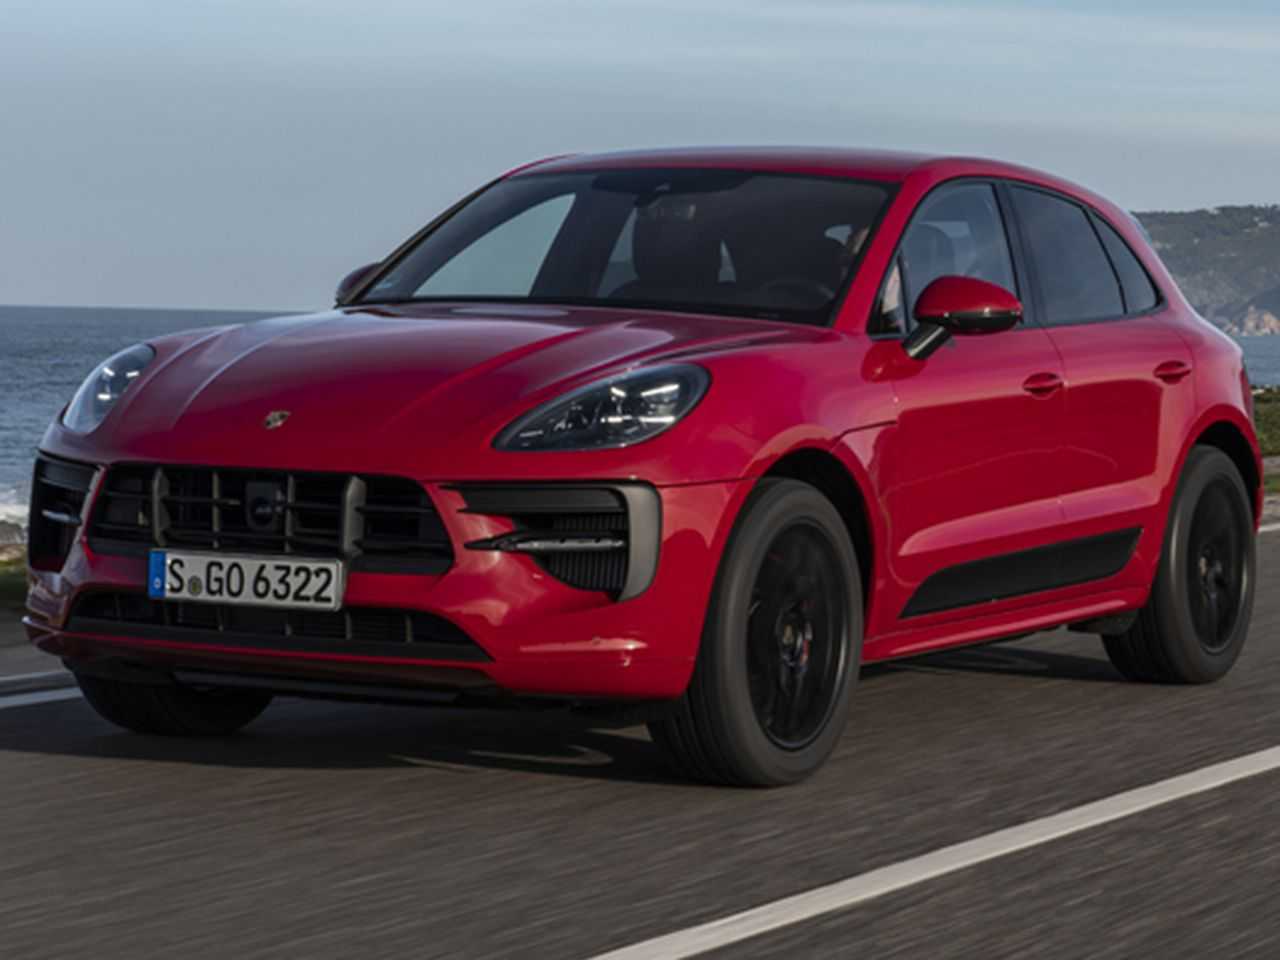 PorscheMacan 2020 - ngulo frontal